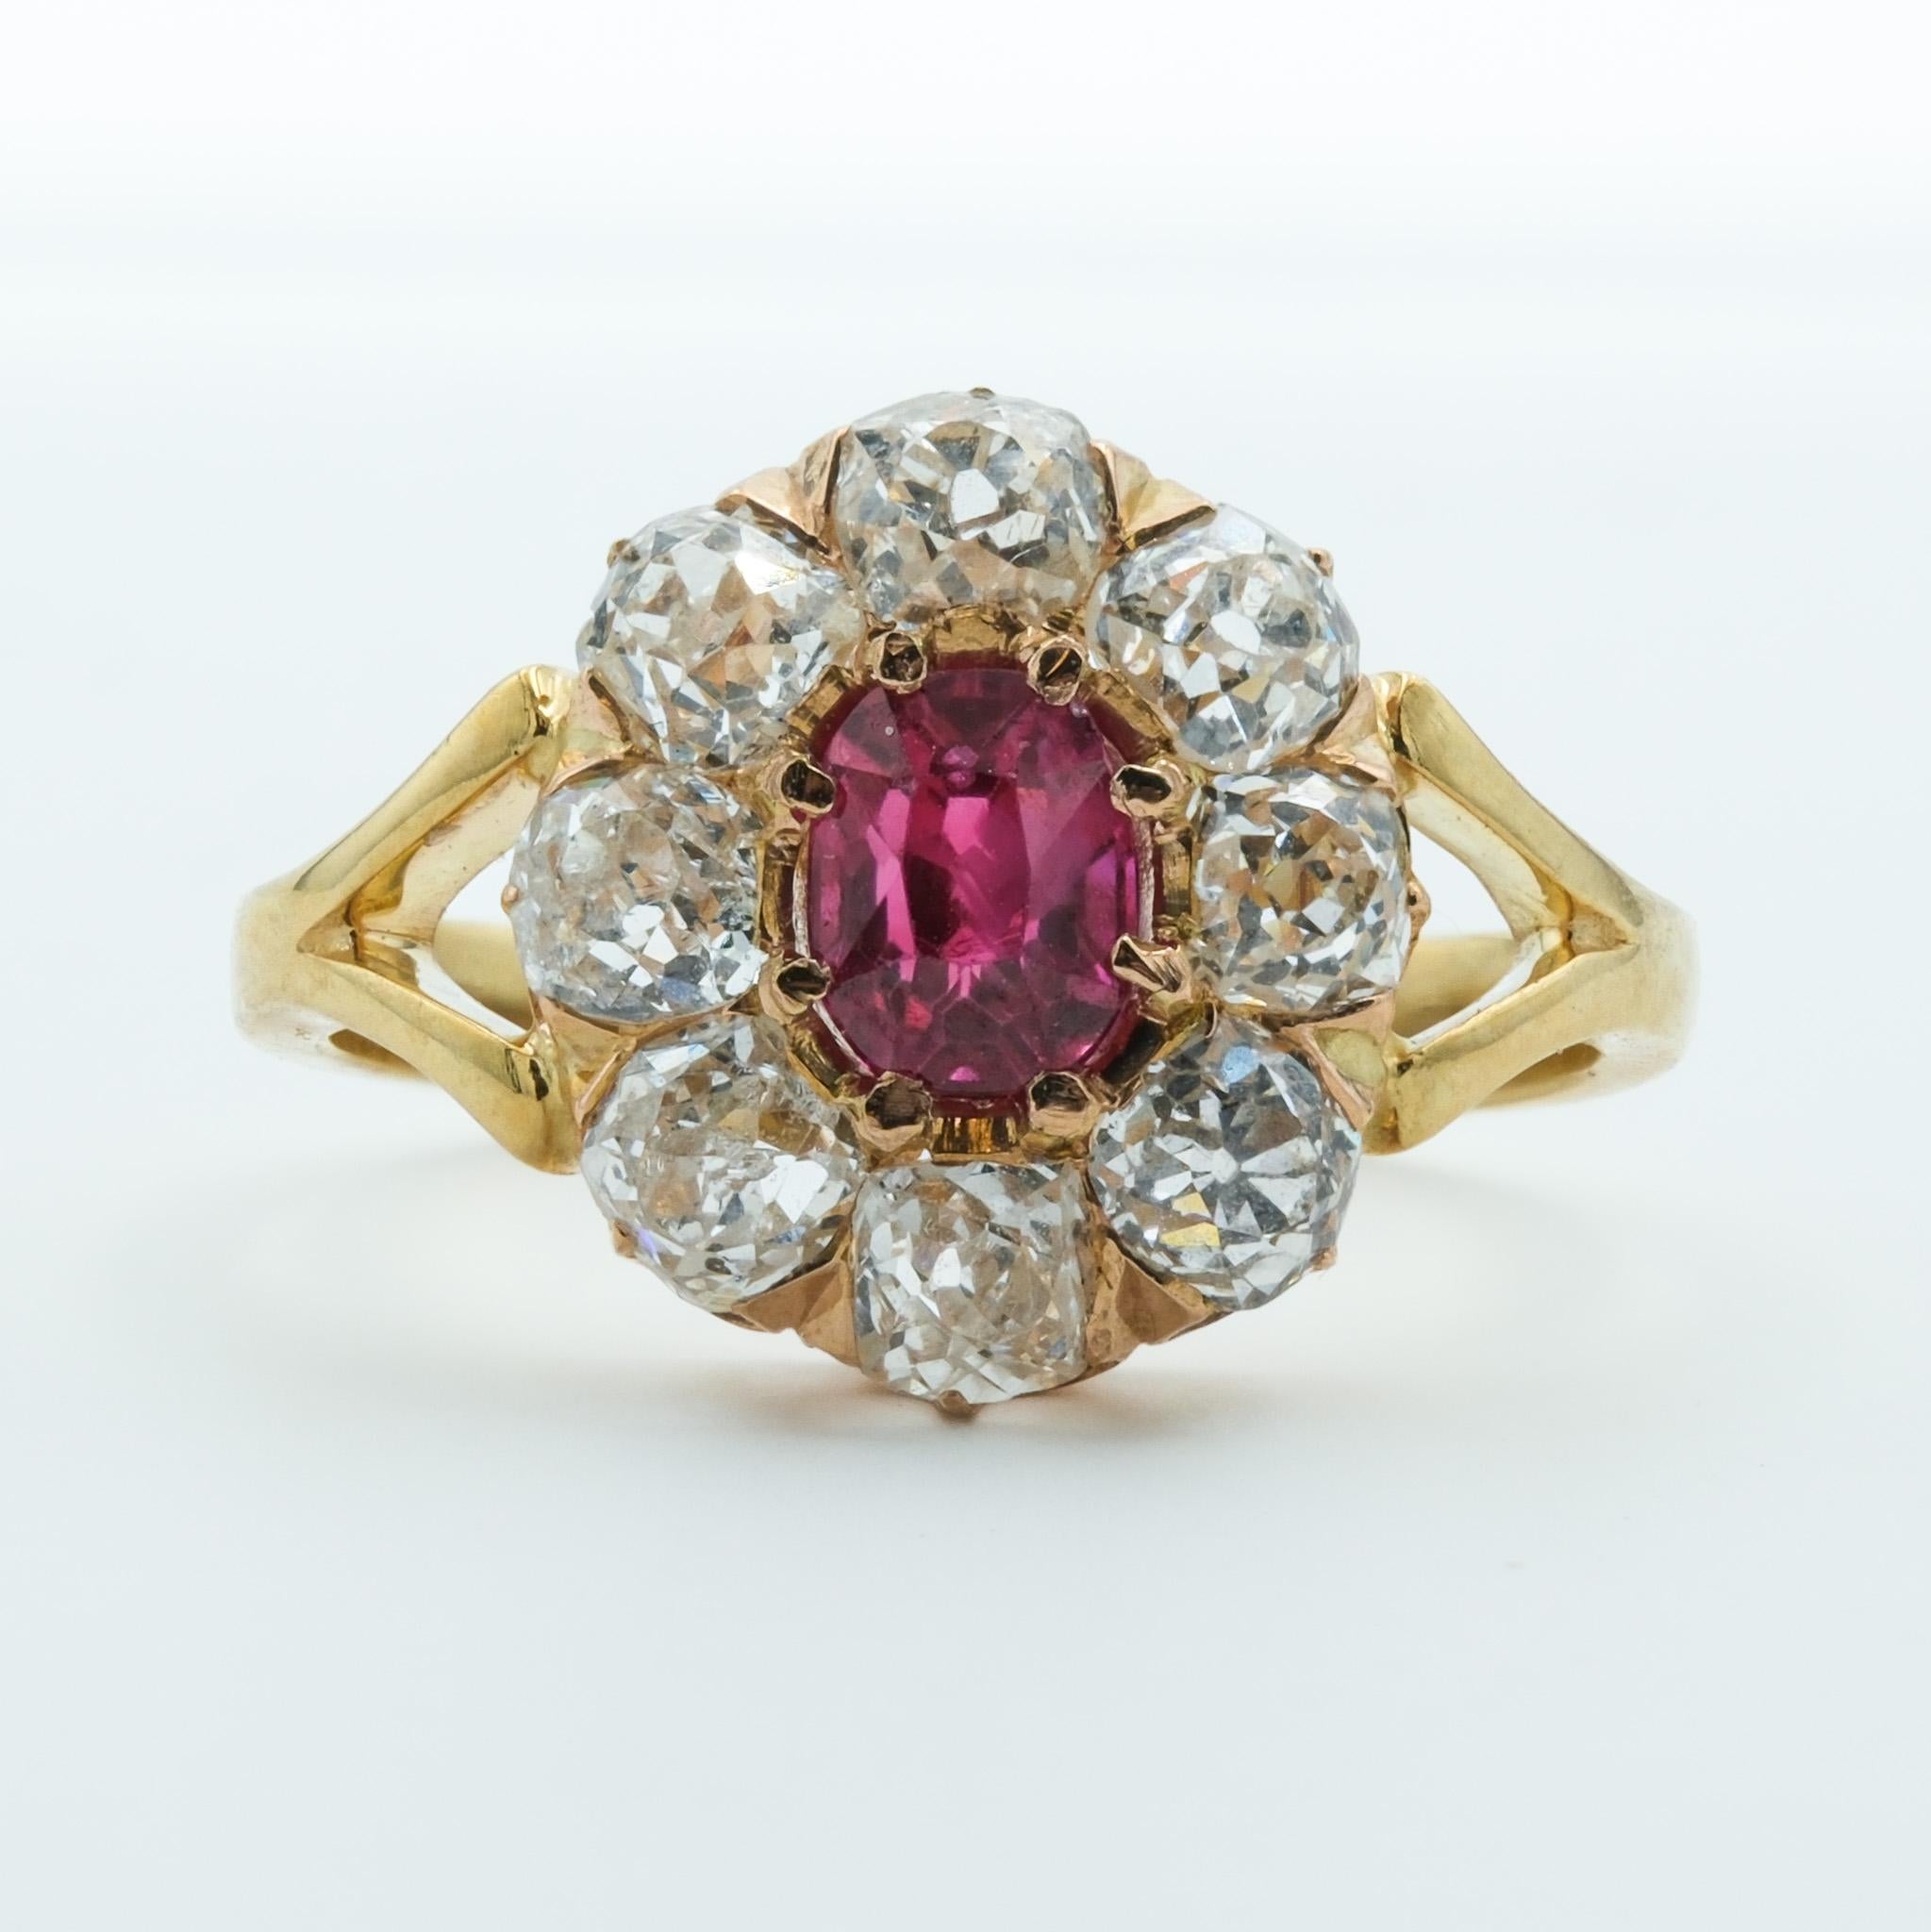 This Victorian-era ring is a resplendent piece of history, crafted from 18 karat gold. It features a central ruby weighing .82ct, a gemstone cherished for its deep, vivid color and is often associated with passion and nobility. The ruby's rich hue